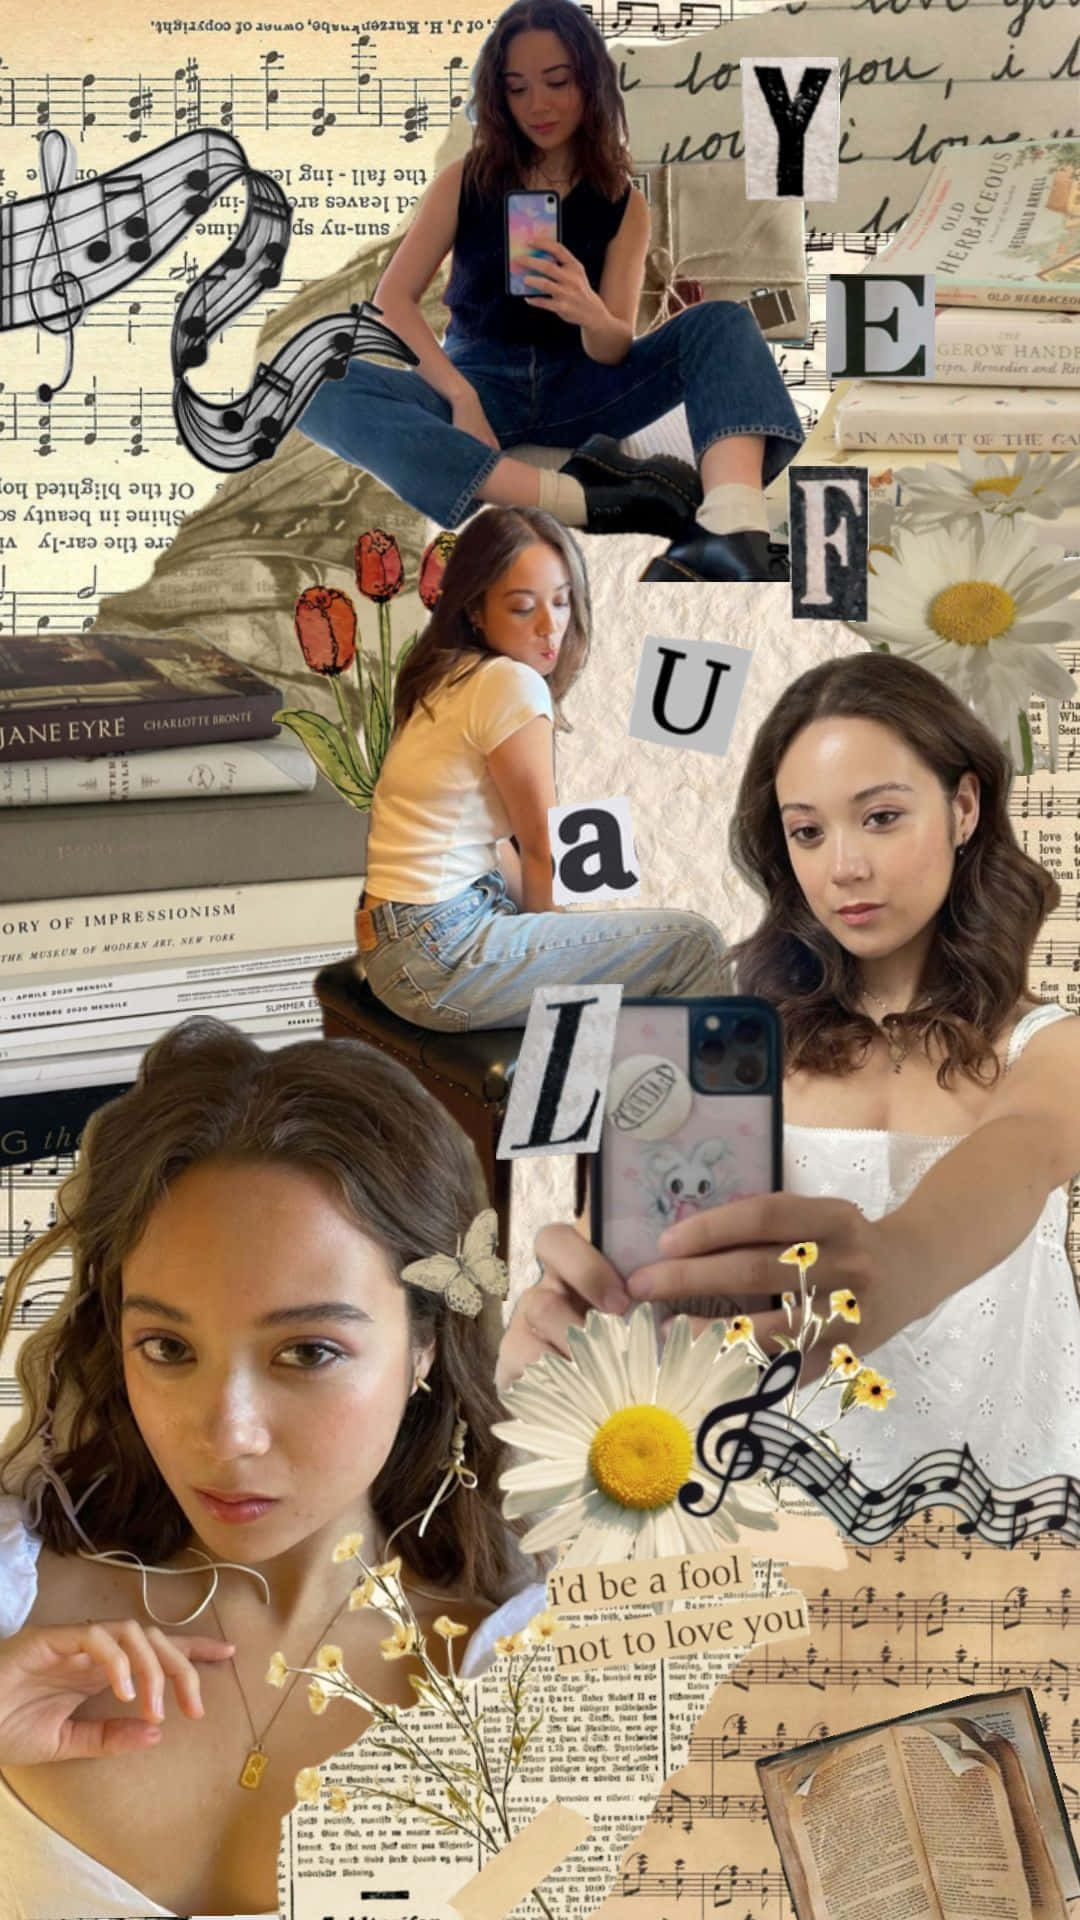 Collageof Womanwith Musicand Literature Background Wallpaper